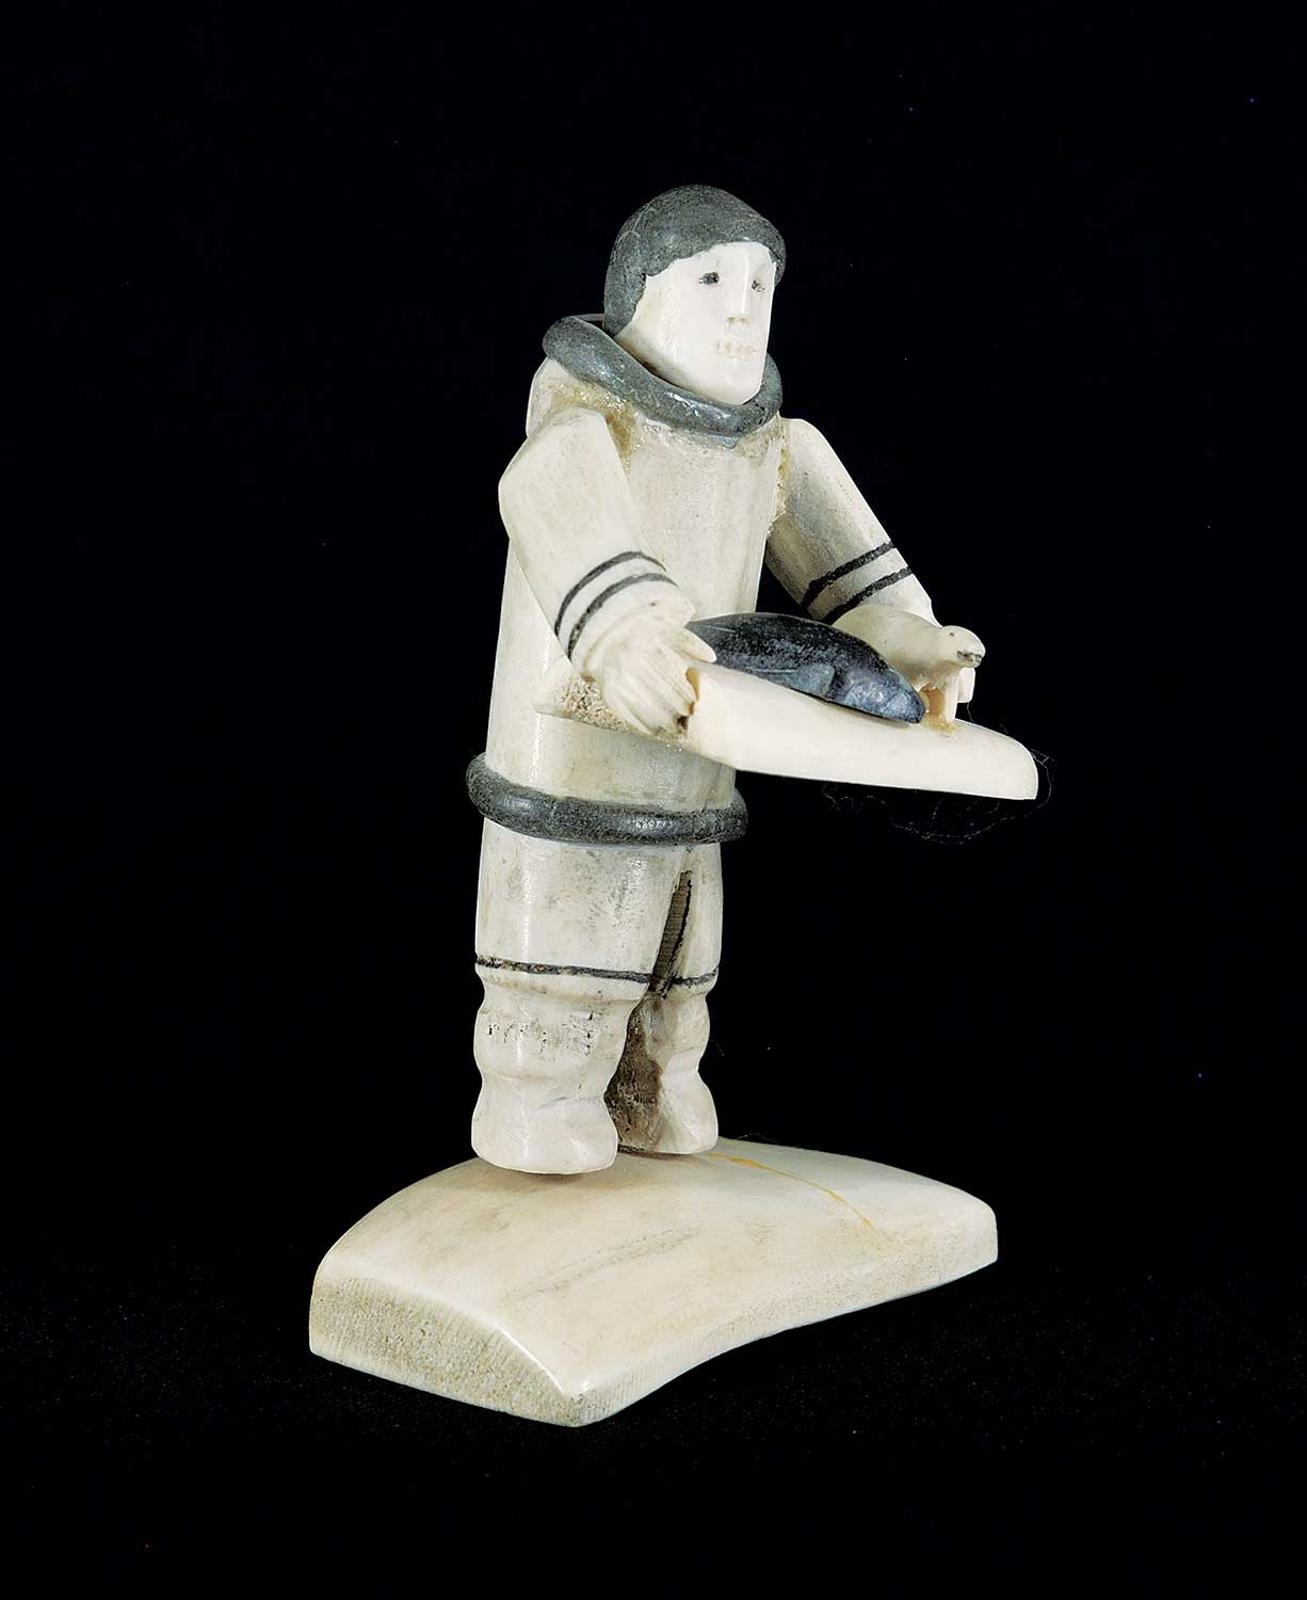 Romeo Inuit - Untitled - Presenting My Finished Carvings